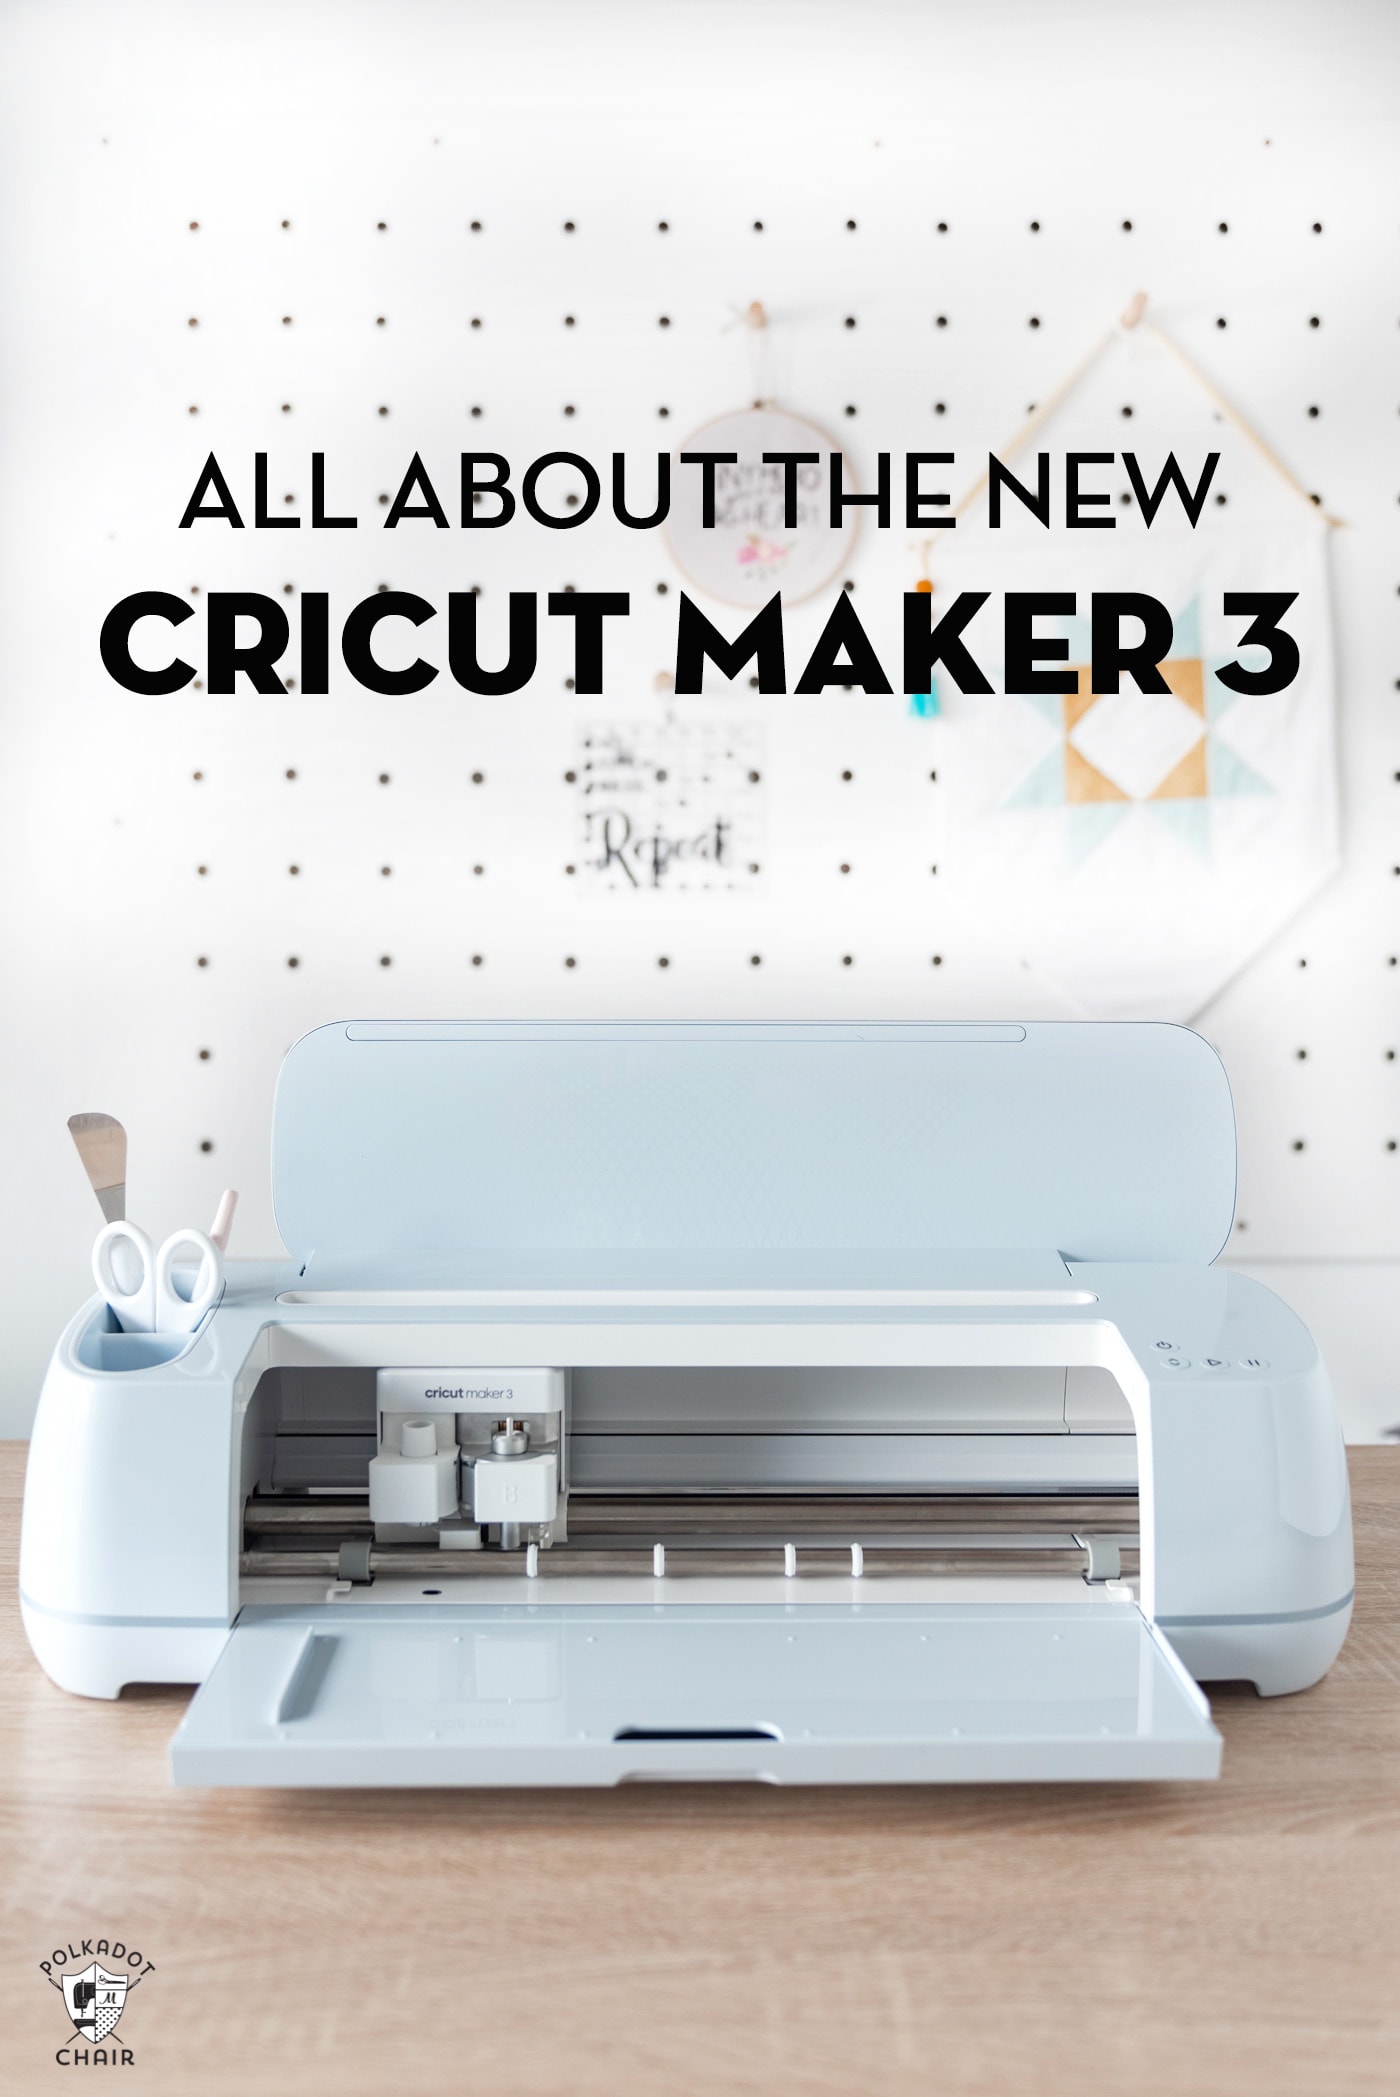 All About the NEW Cricut Maker 3 Machine